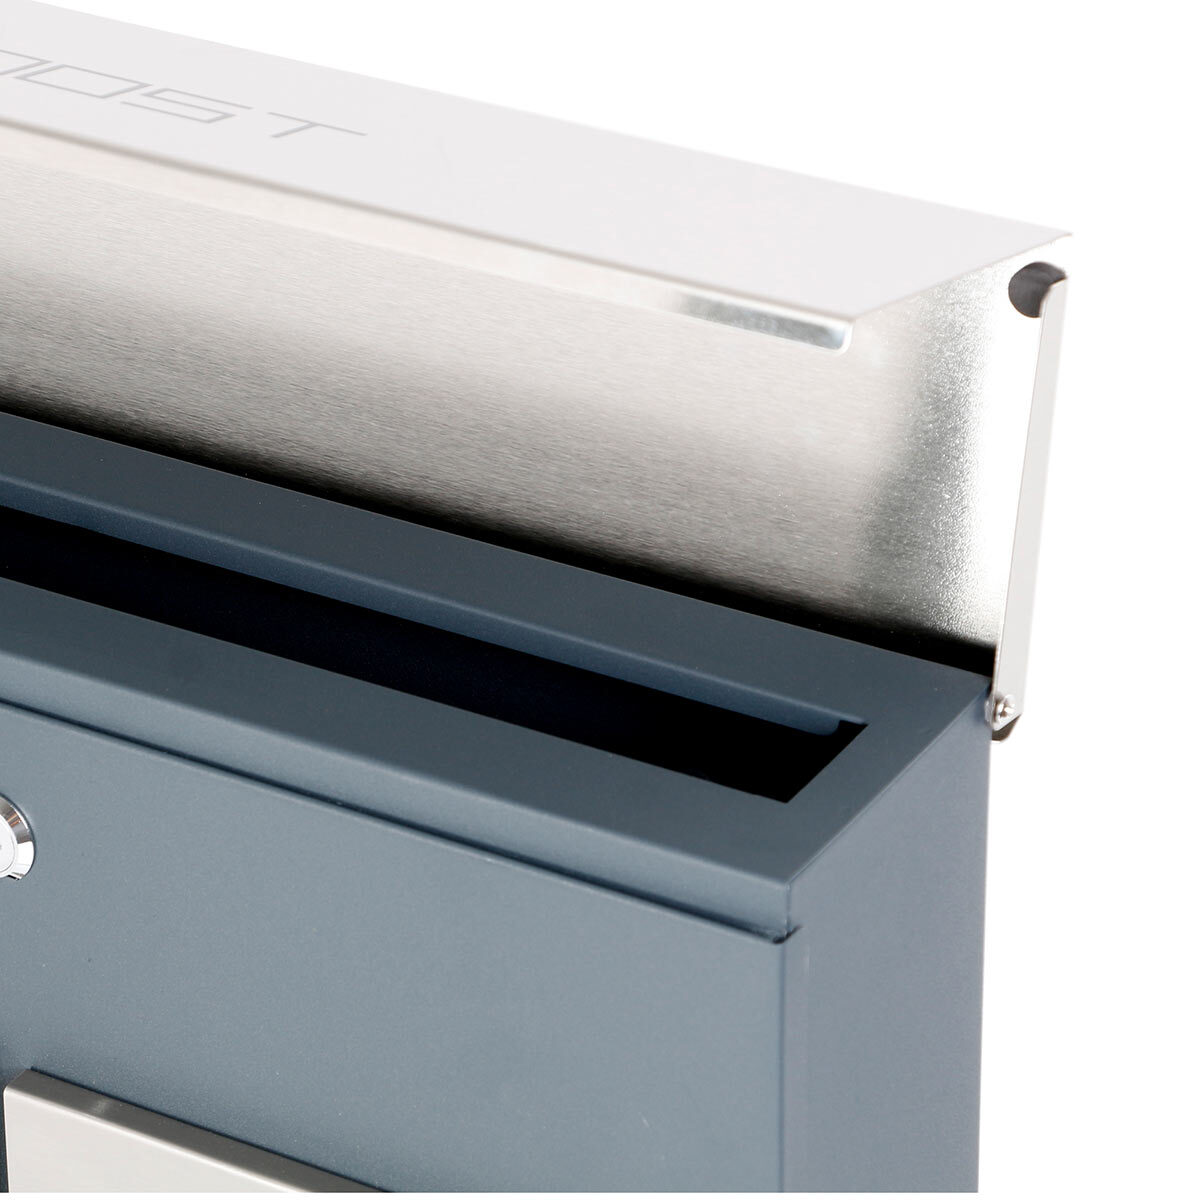 Close up image of top of letterbox with slot on white background